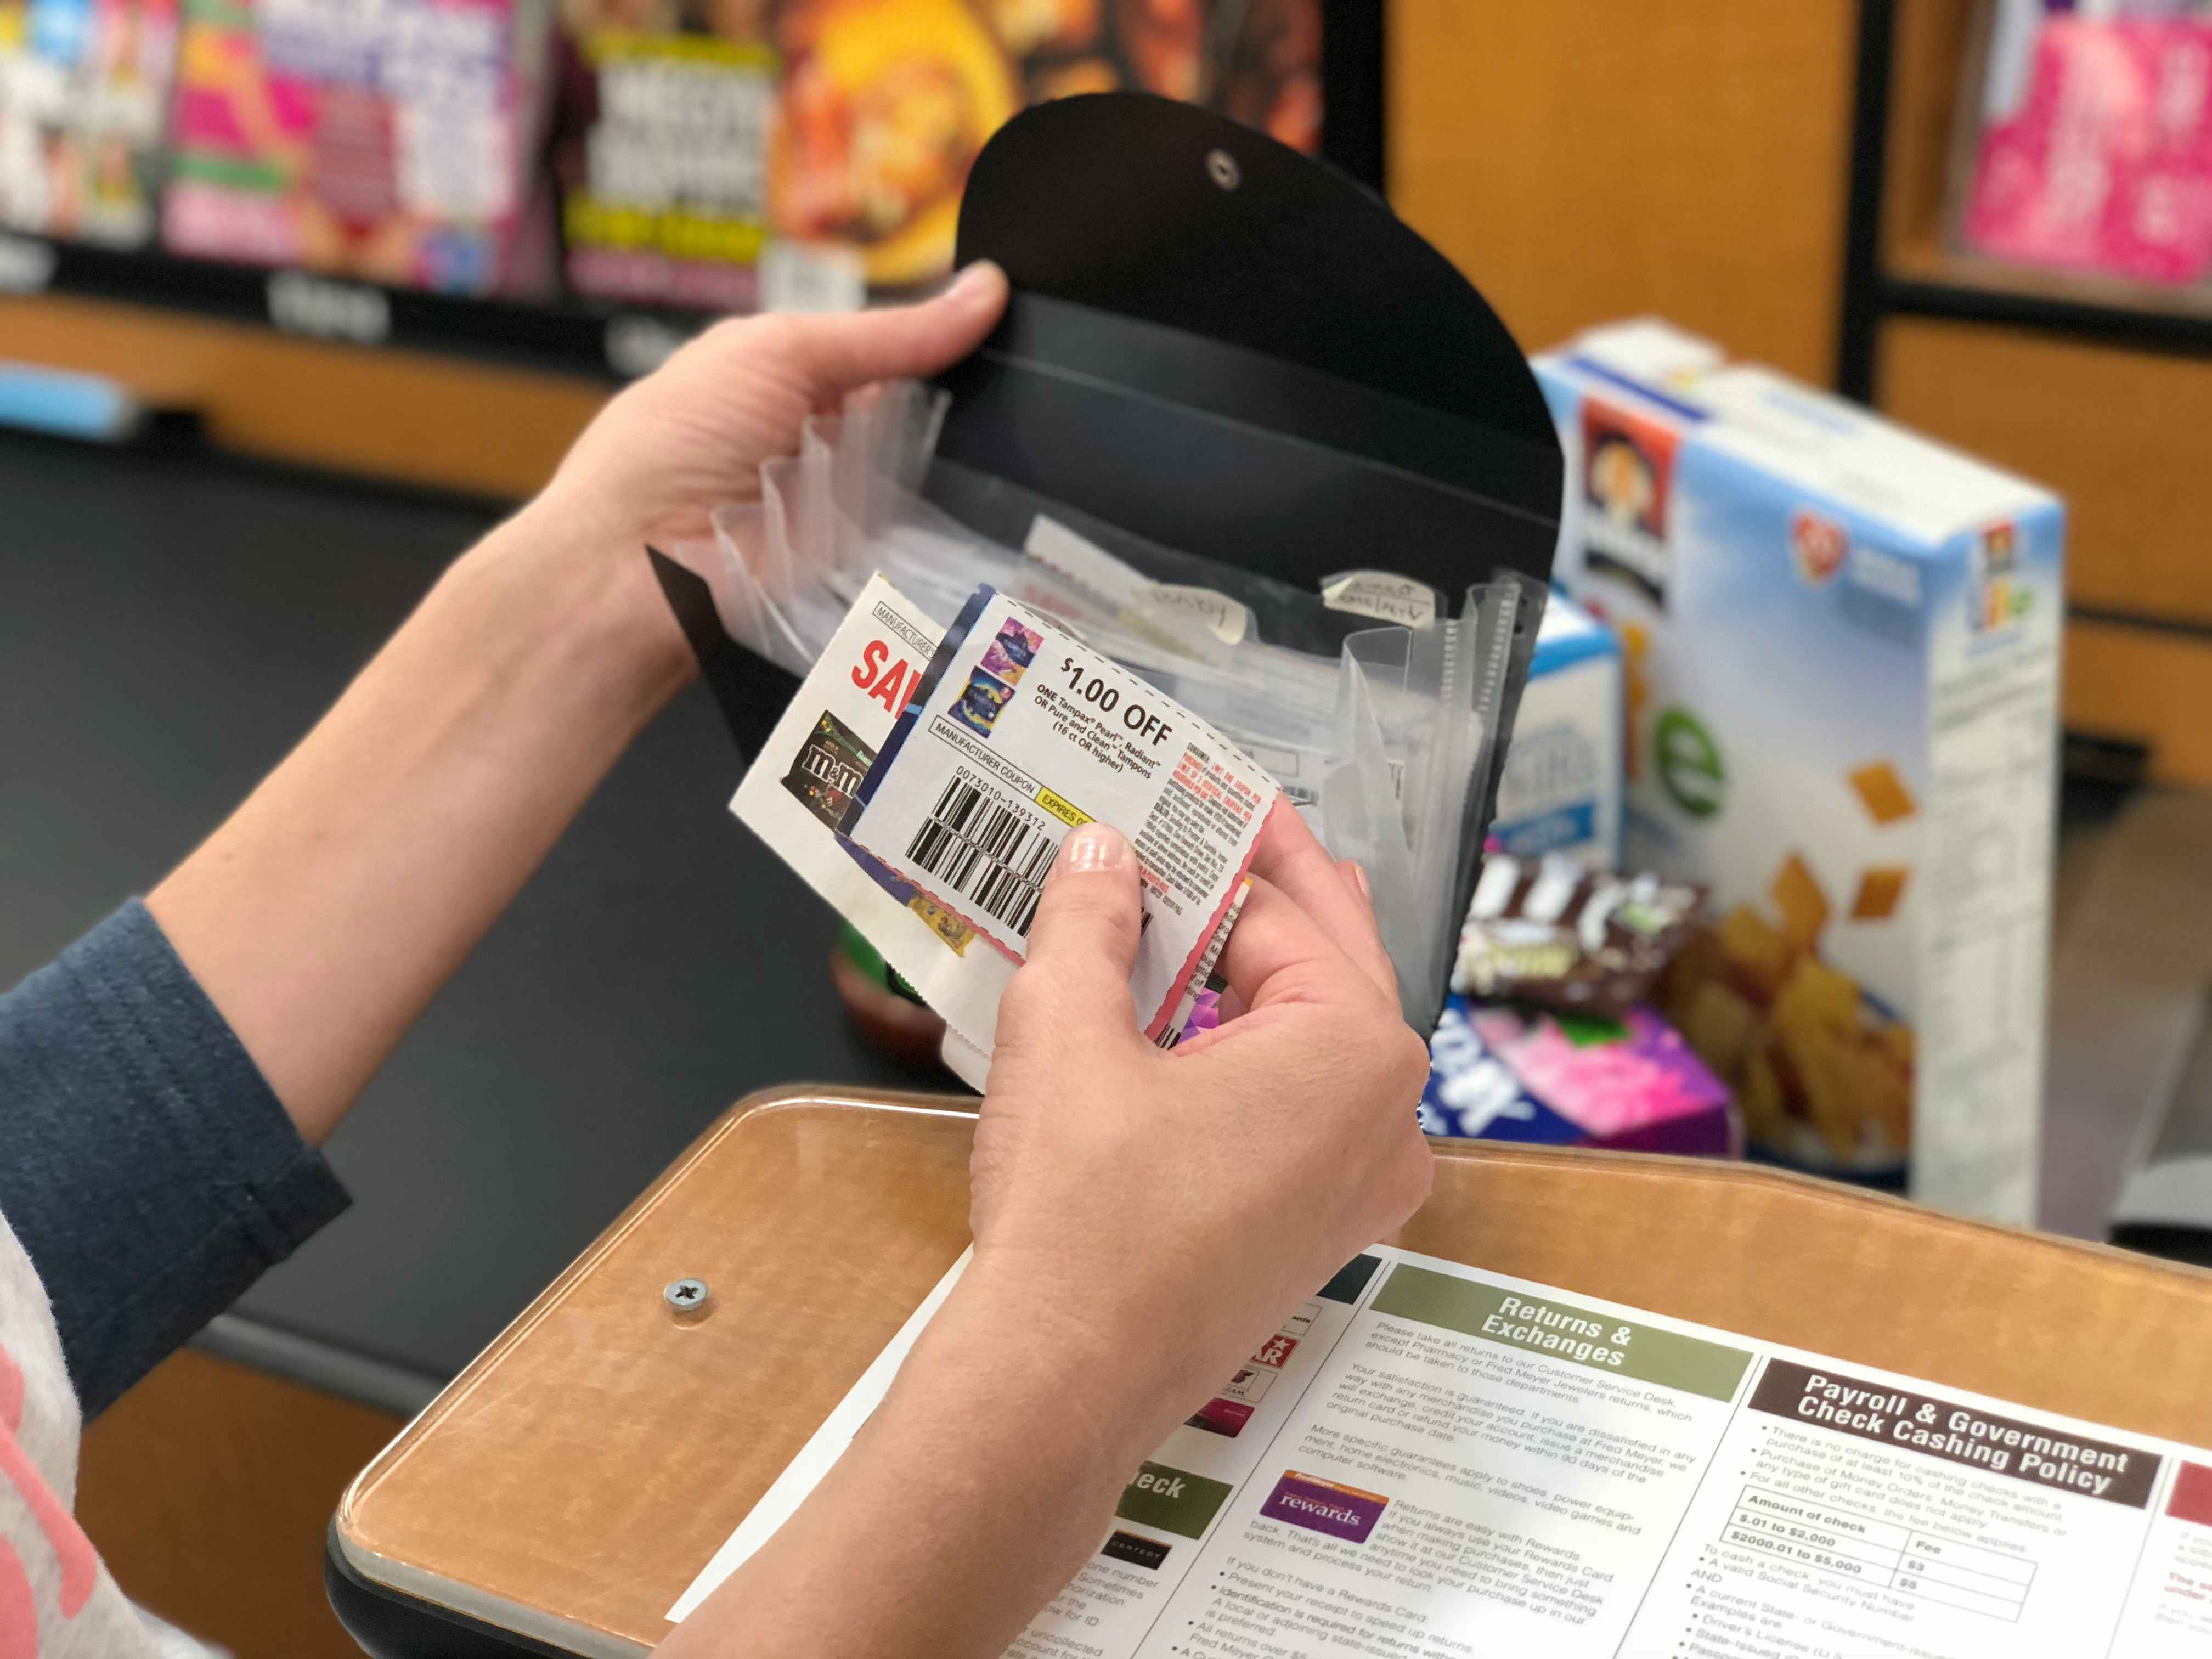 A person's hands holding up a small file organizer and a couple of coupons in front of the conveyer belt of a grocery checkout lane.